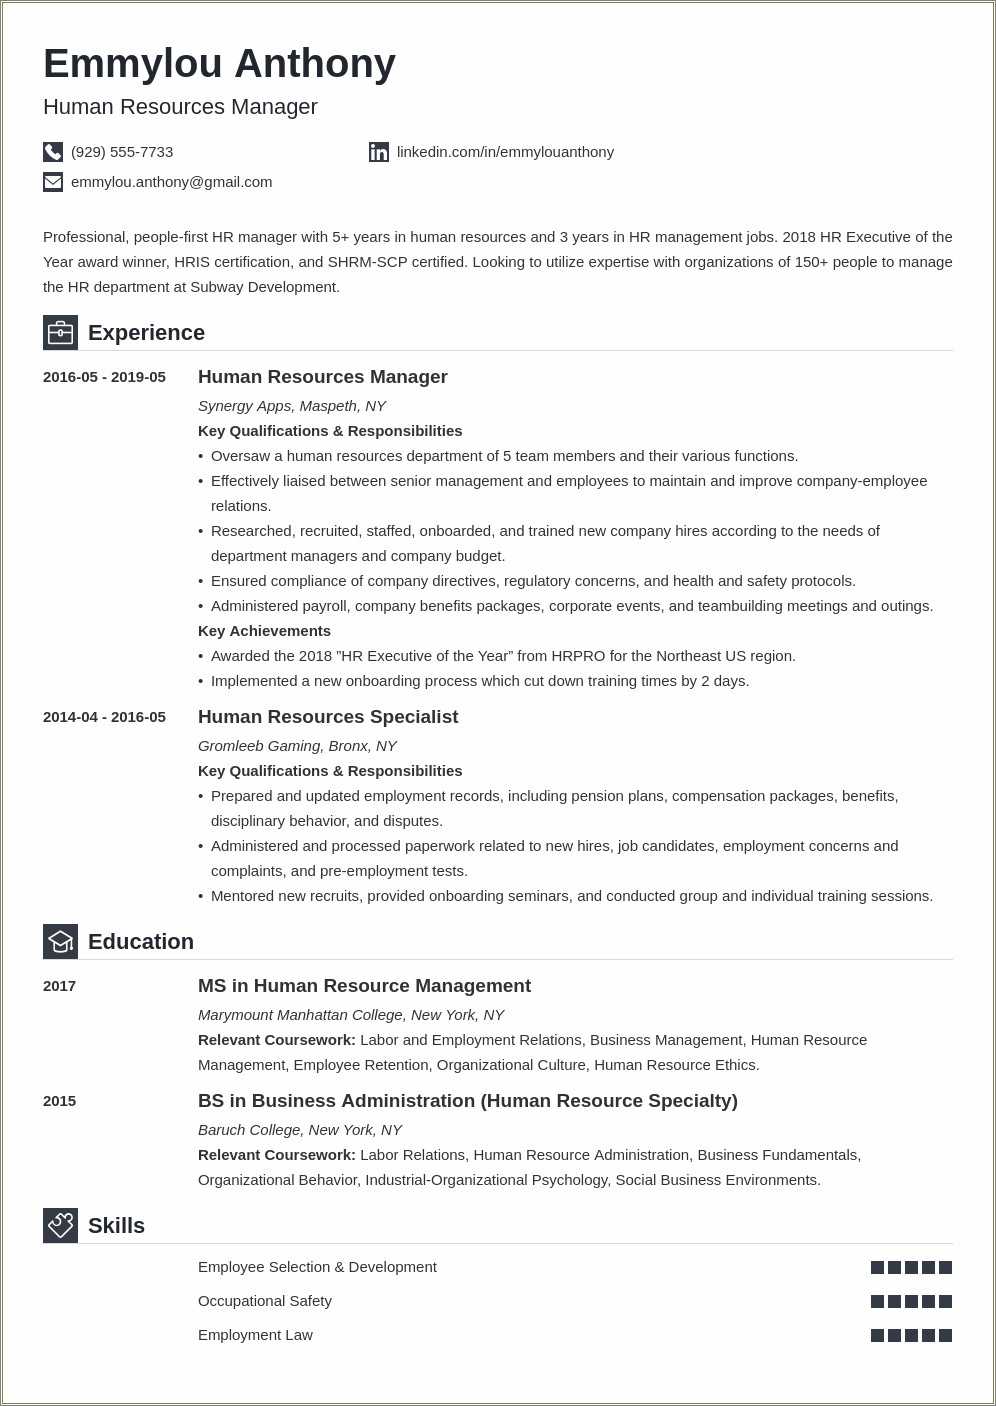 Sample Resume For Industrial Relations Manager - Resume Example Gallery